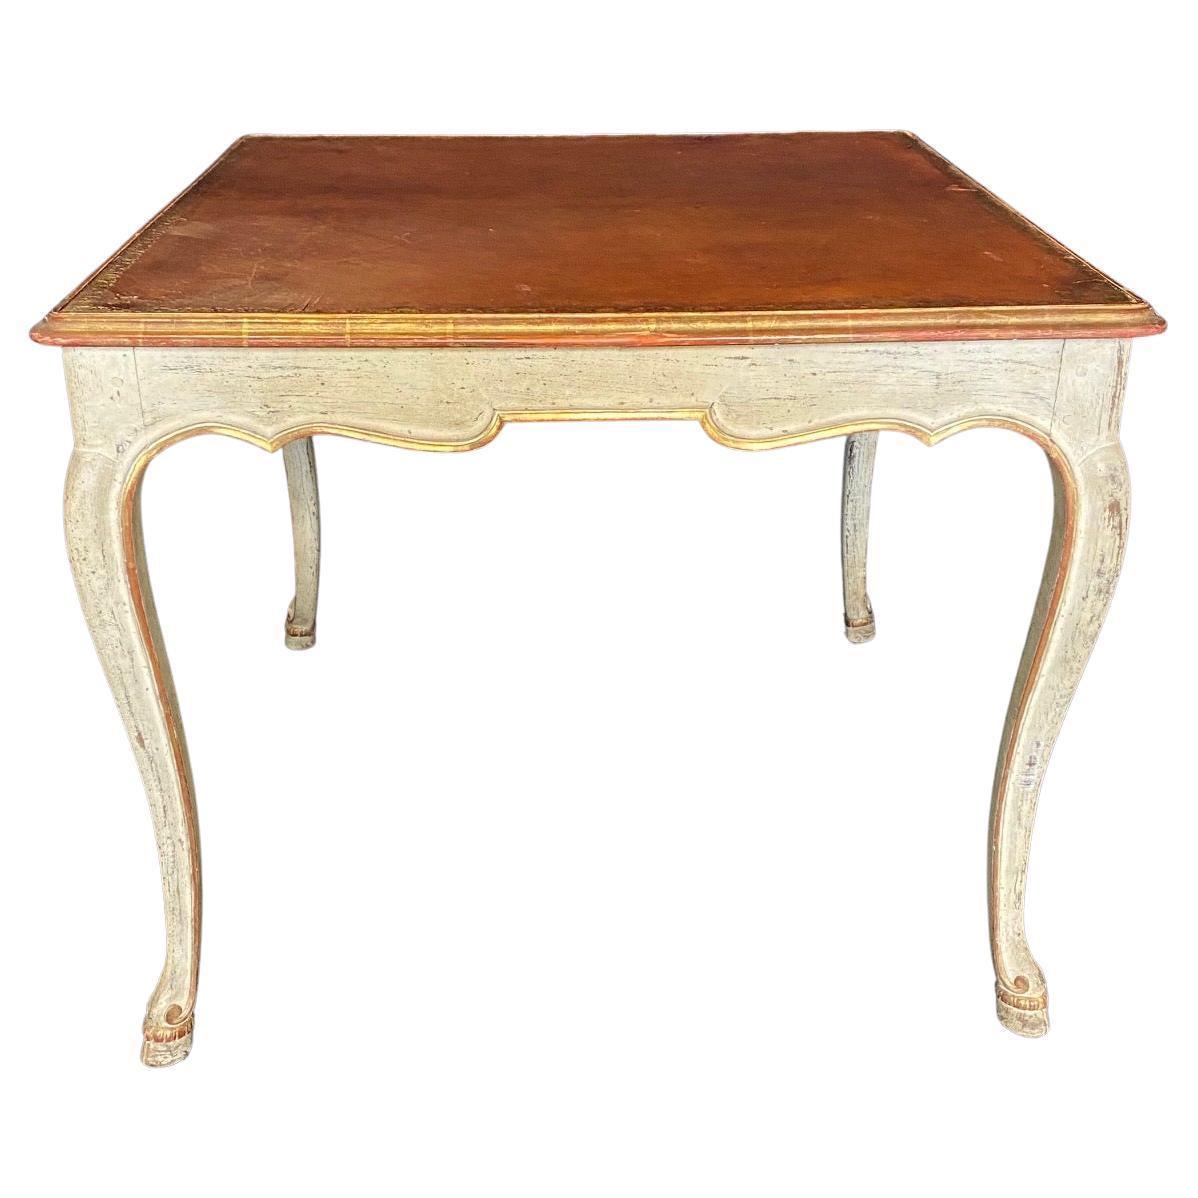 Beautiful French 19th Century Leather Top Embossed Table with Hoof Feet For Sale